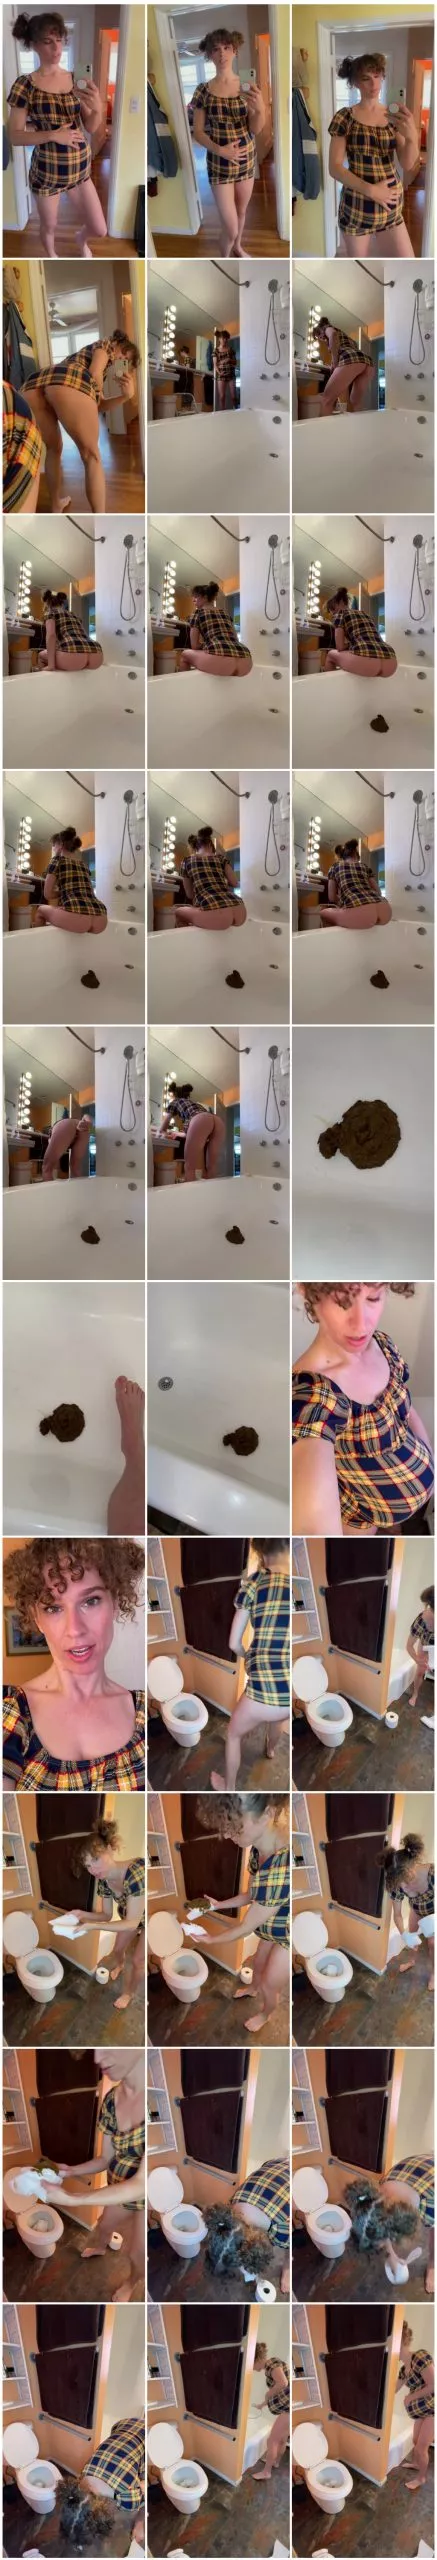 VibeWithMolly - Pregnant Role Play Poop in Bathtub [Scat solo, shit, defecation, Pissing, Big Shit, Shitty Ass]